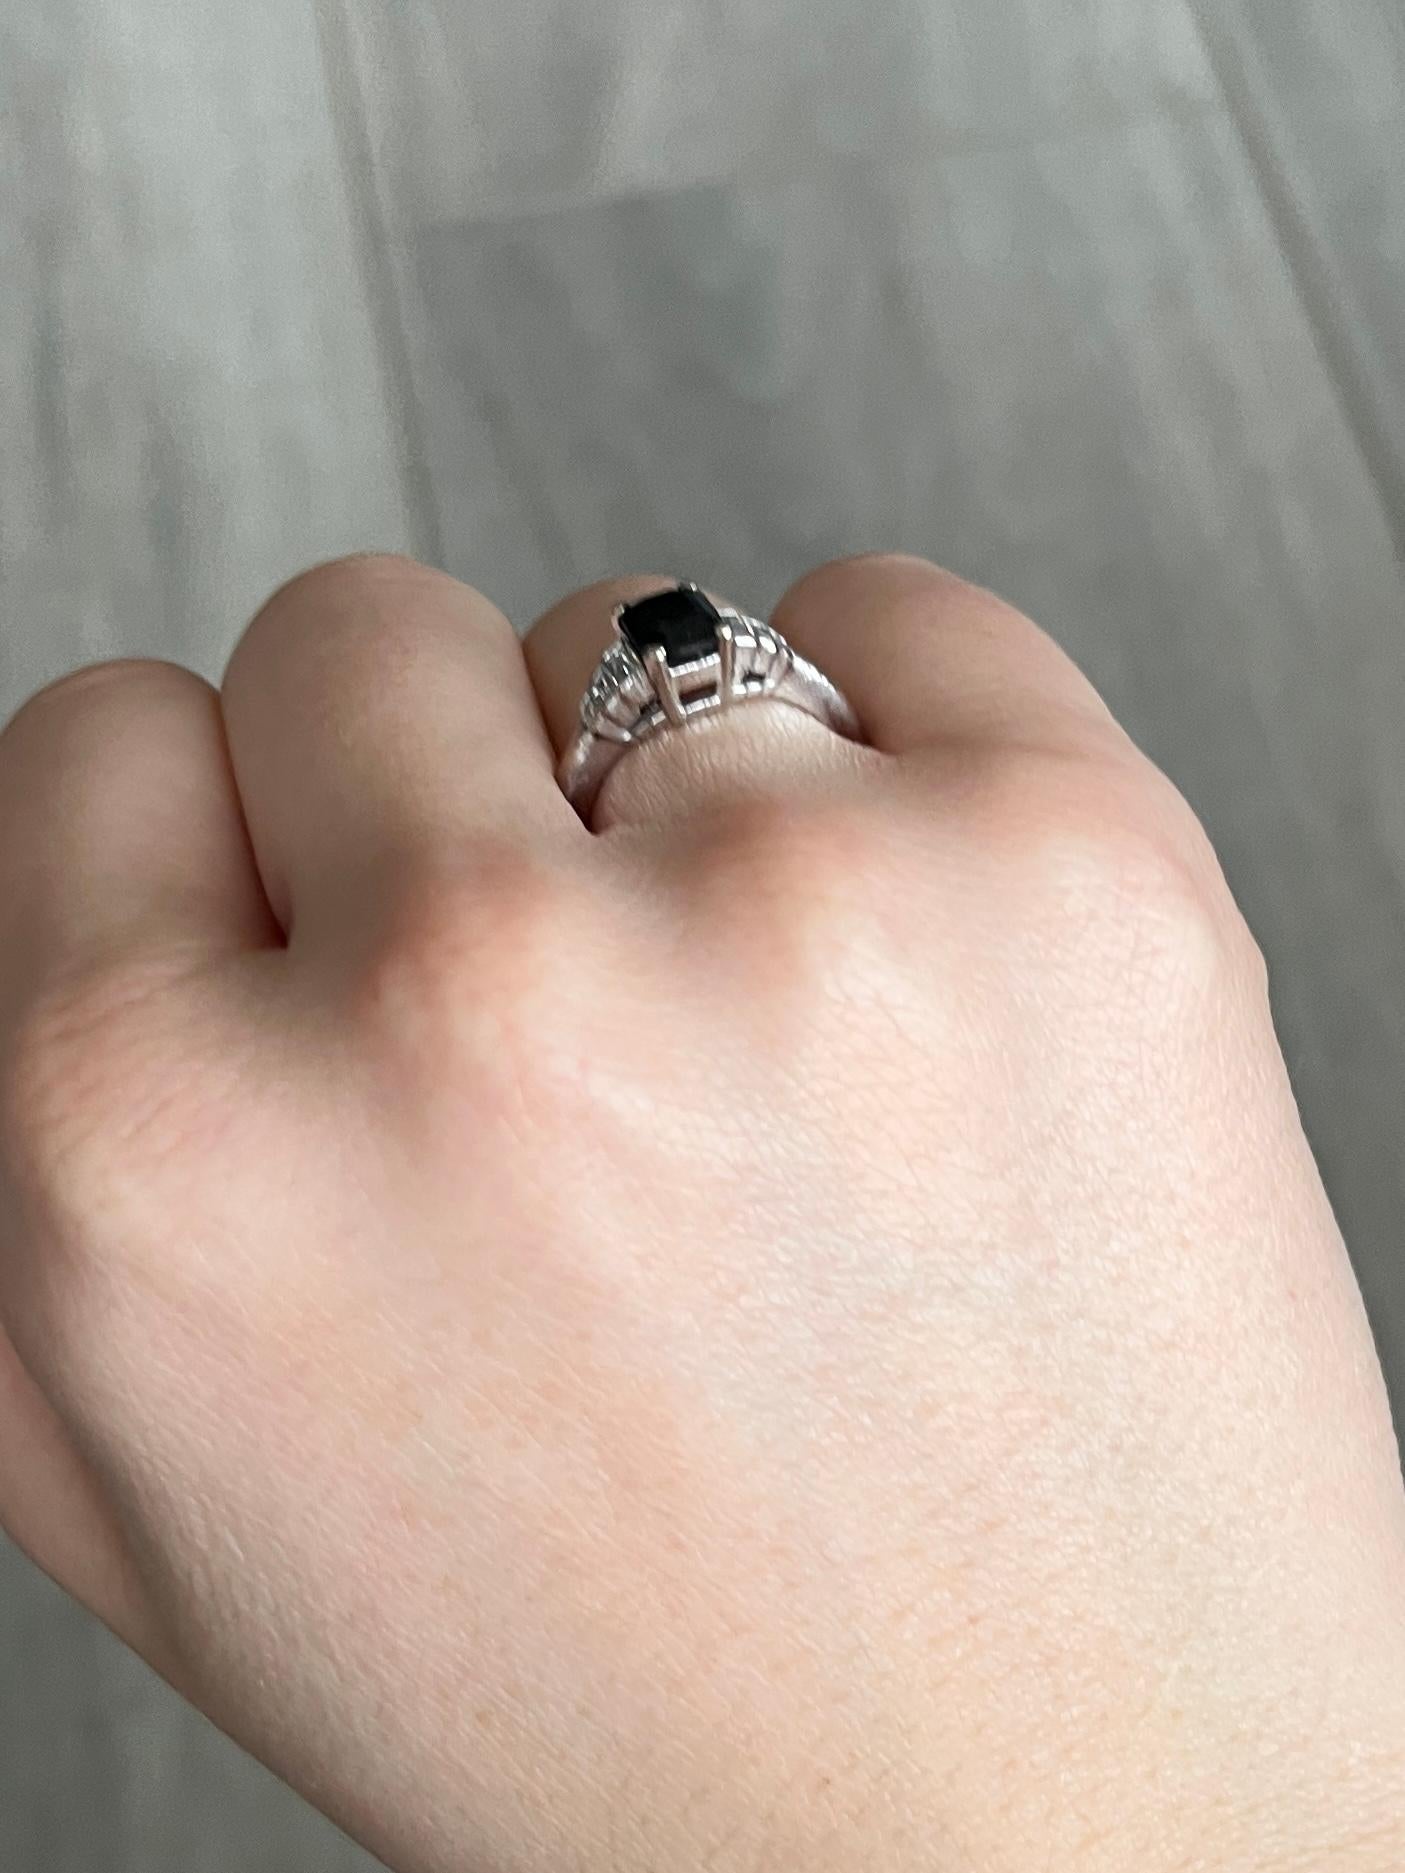 At the centre of this ring there is a gorgeous deep blue sapphire measuring 80pts and sat either side are bright baguette diamond step shoulders. The diamond total is 30pts.  

Ring Size: I 1/2 or 4 1/2 
Height Off Finger: 6mm 

Weight: 4.6g